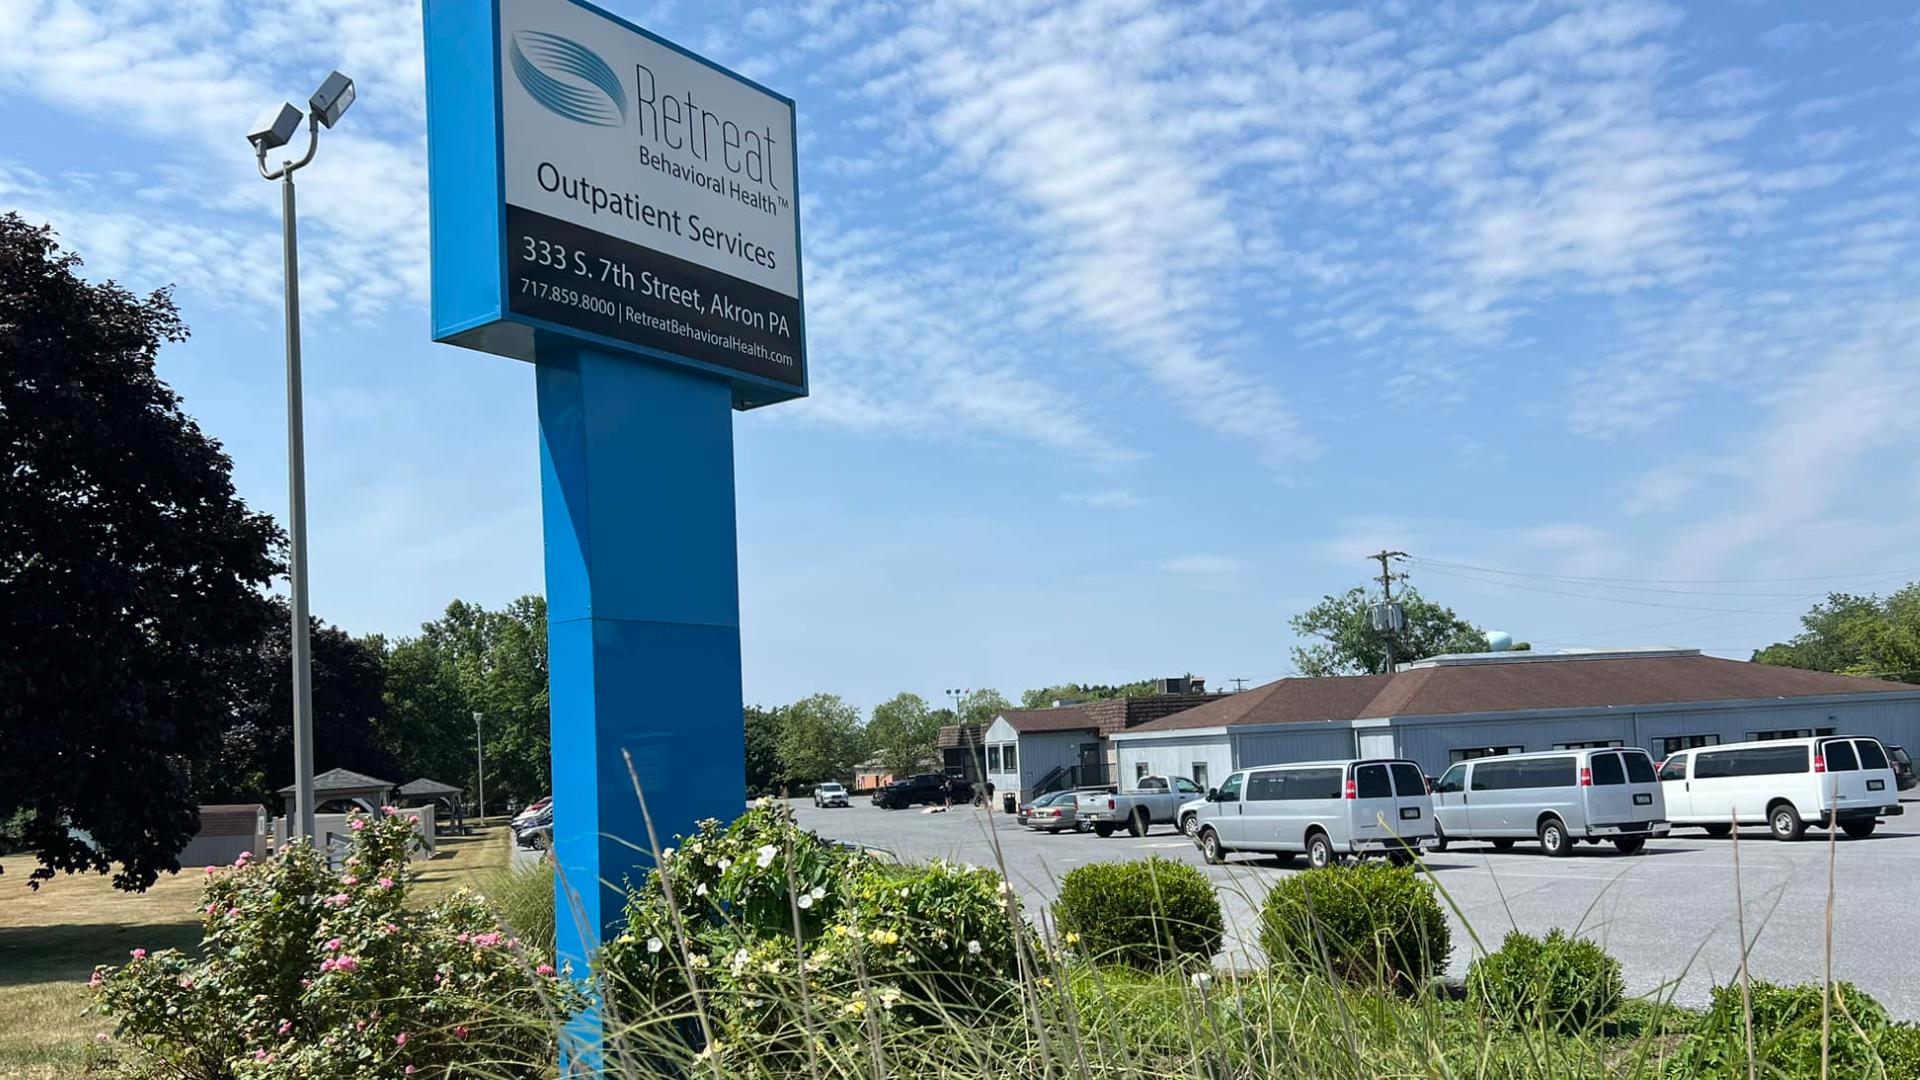 Retreat Behavioral Health operates two locations in Lancaster County, along with other facilities in Florida and Connecticut.